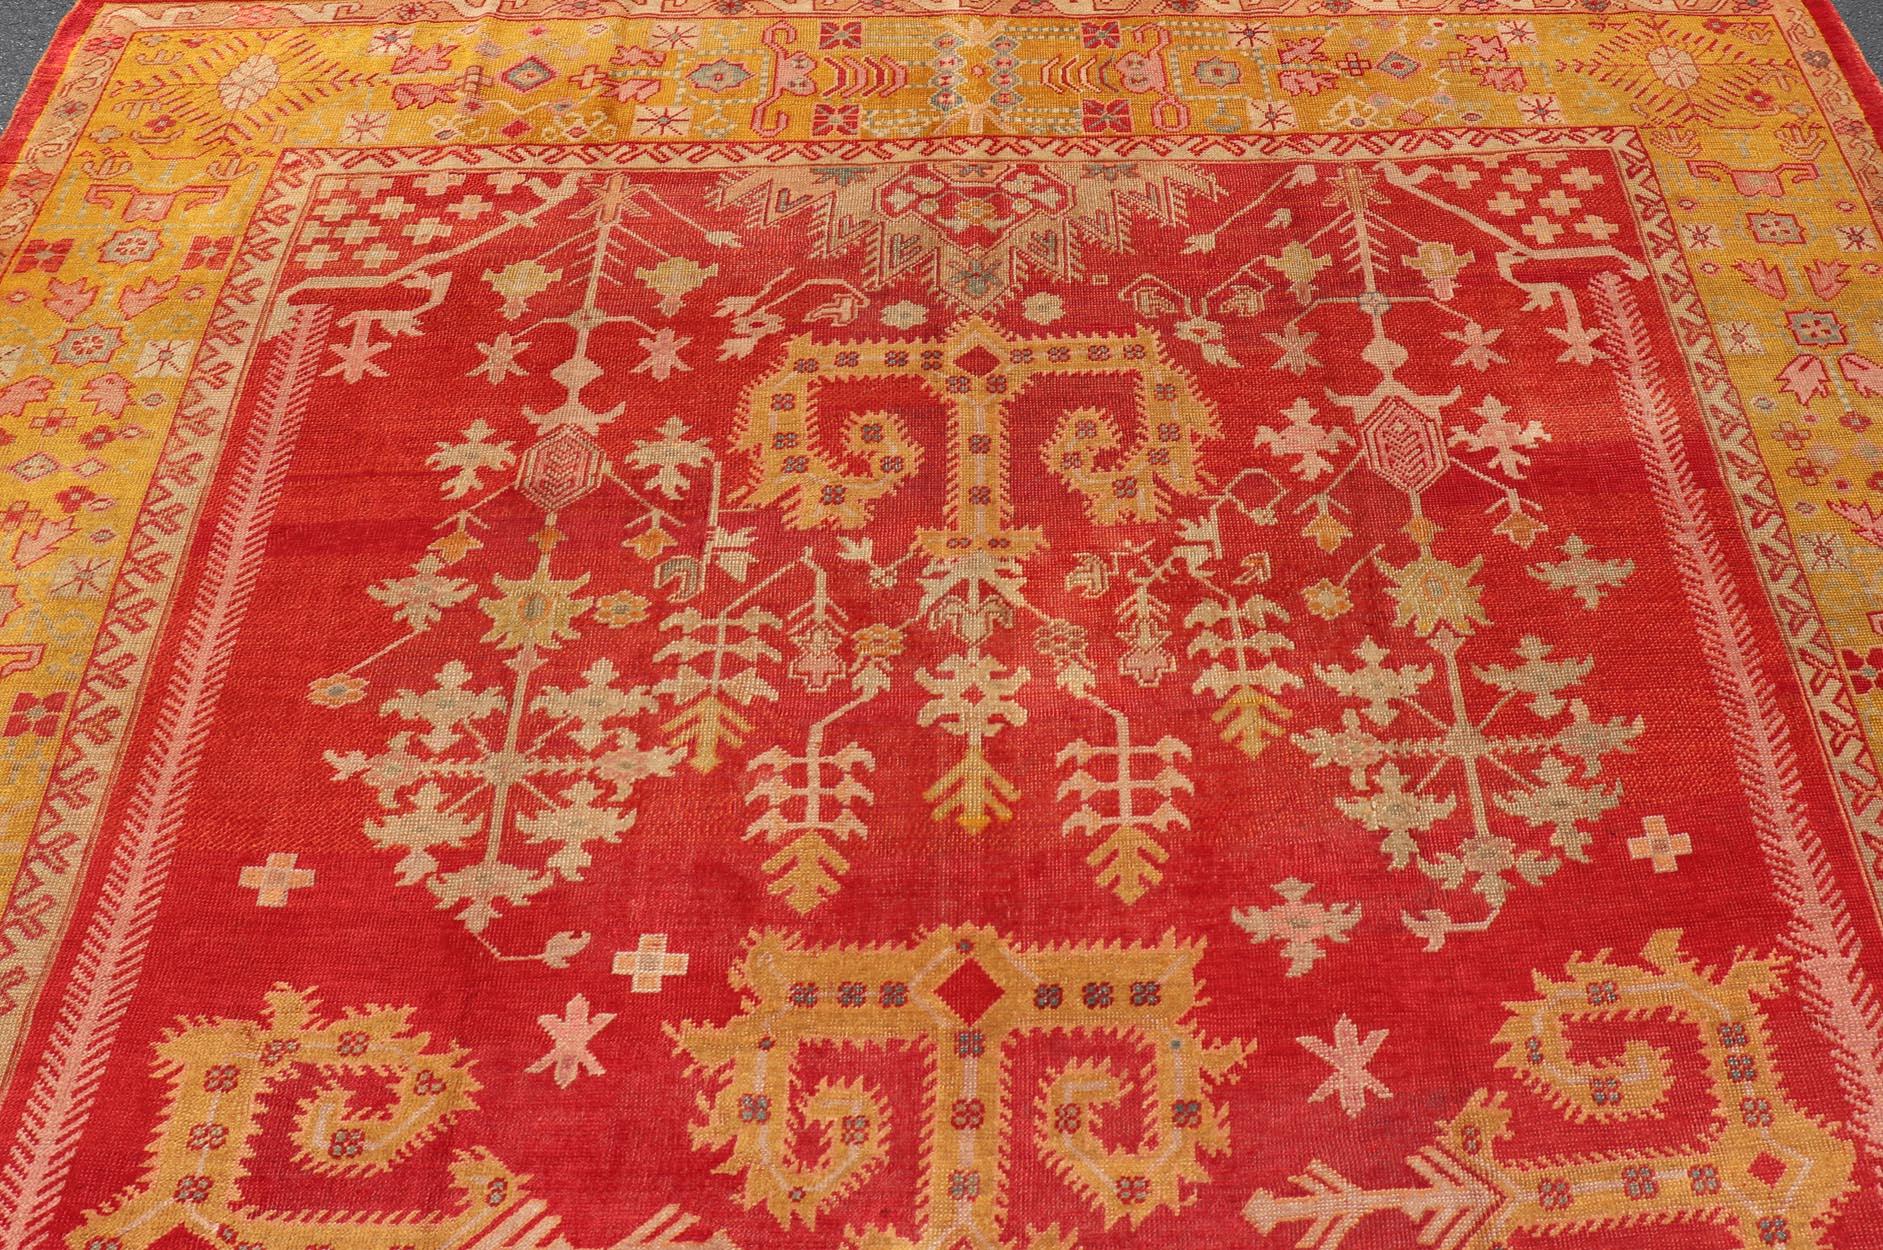 Antique Turkish Oushak Rug in Royal Red and Saffron Gold with Geometric Design For Sale 10